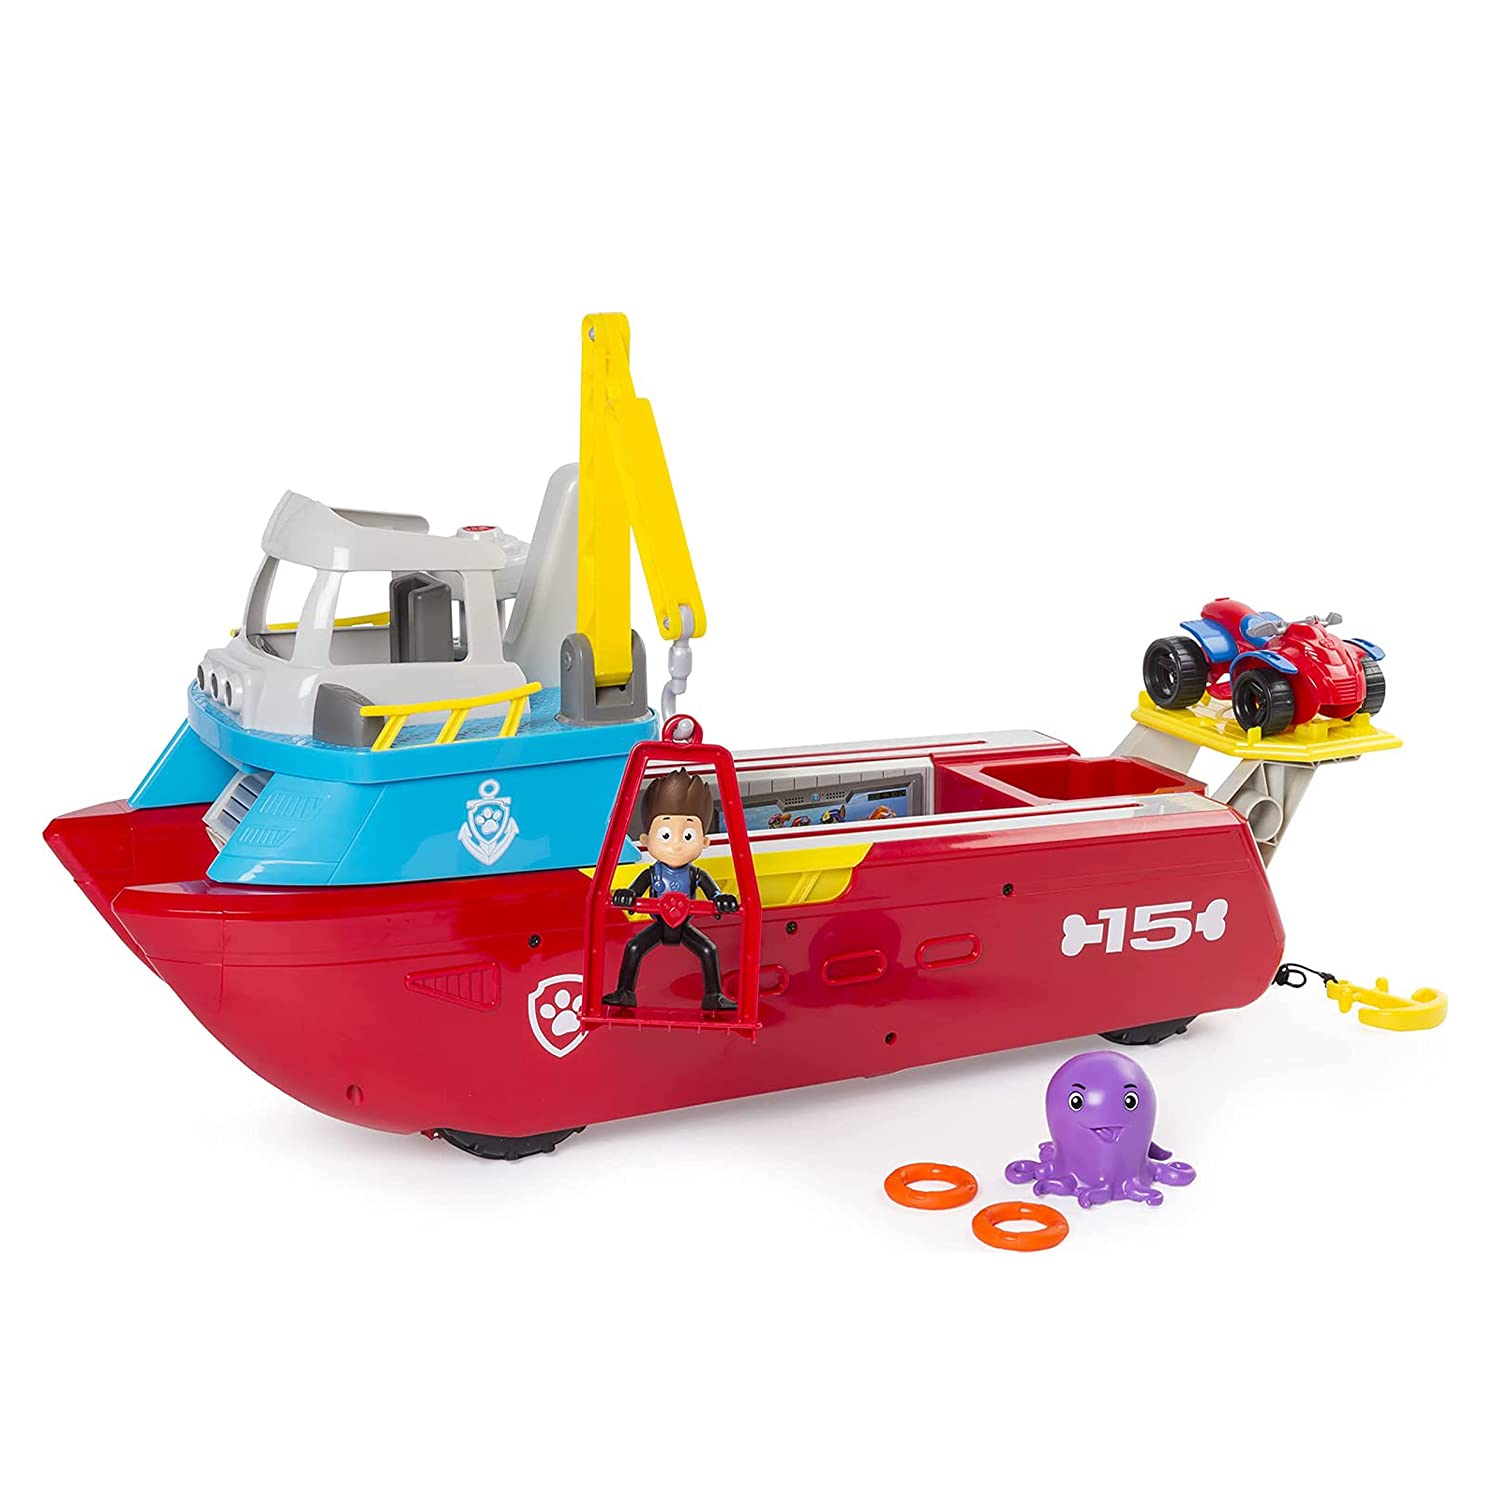 Paw Patrol Sea Patrol, Sea Patroller Transforming Toy Vehicle with Lights & Sounds, Ages 3 & up